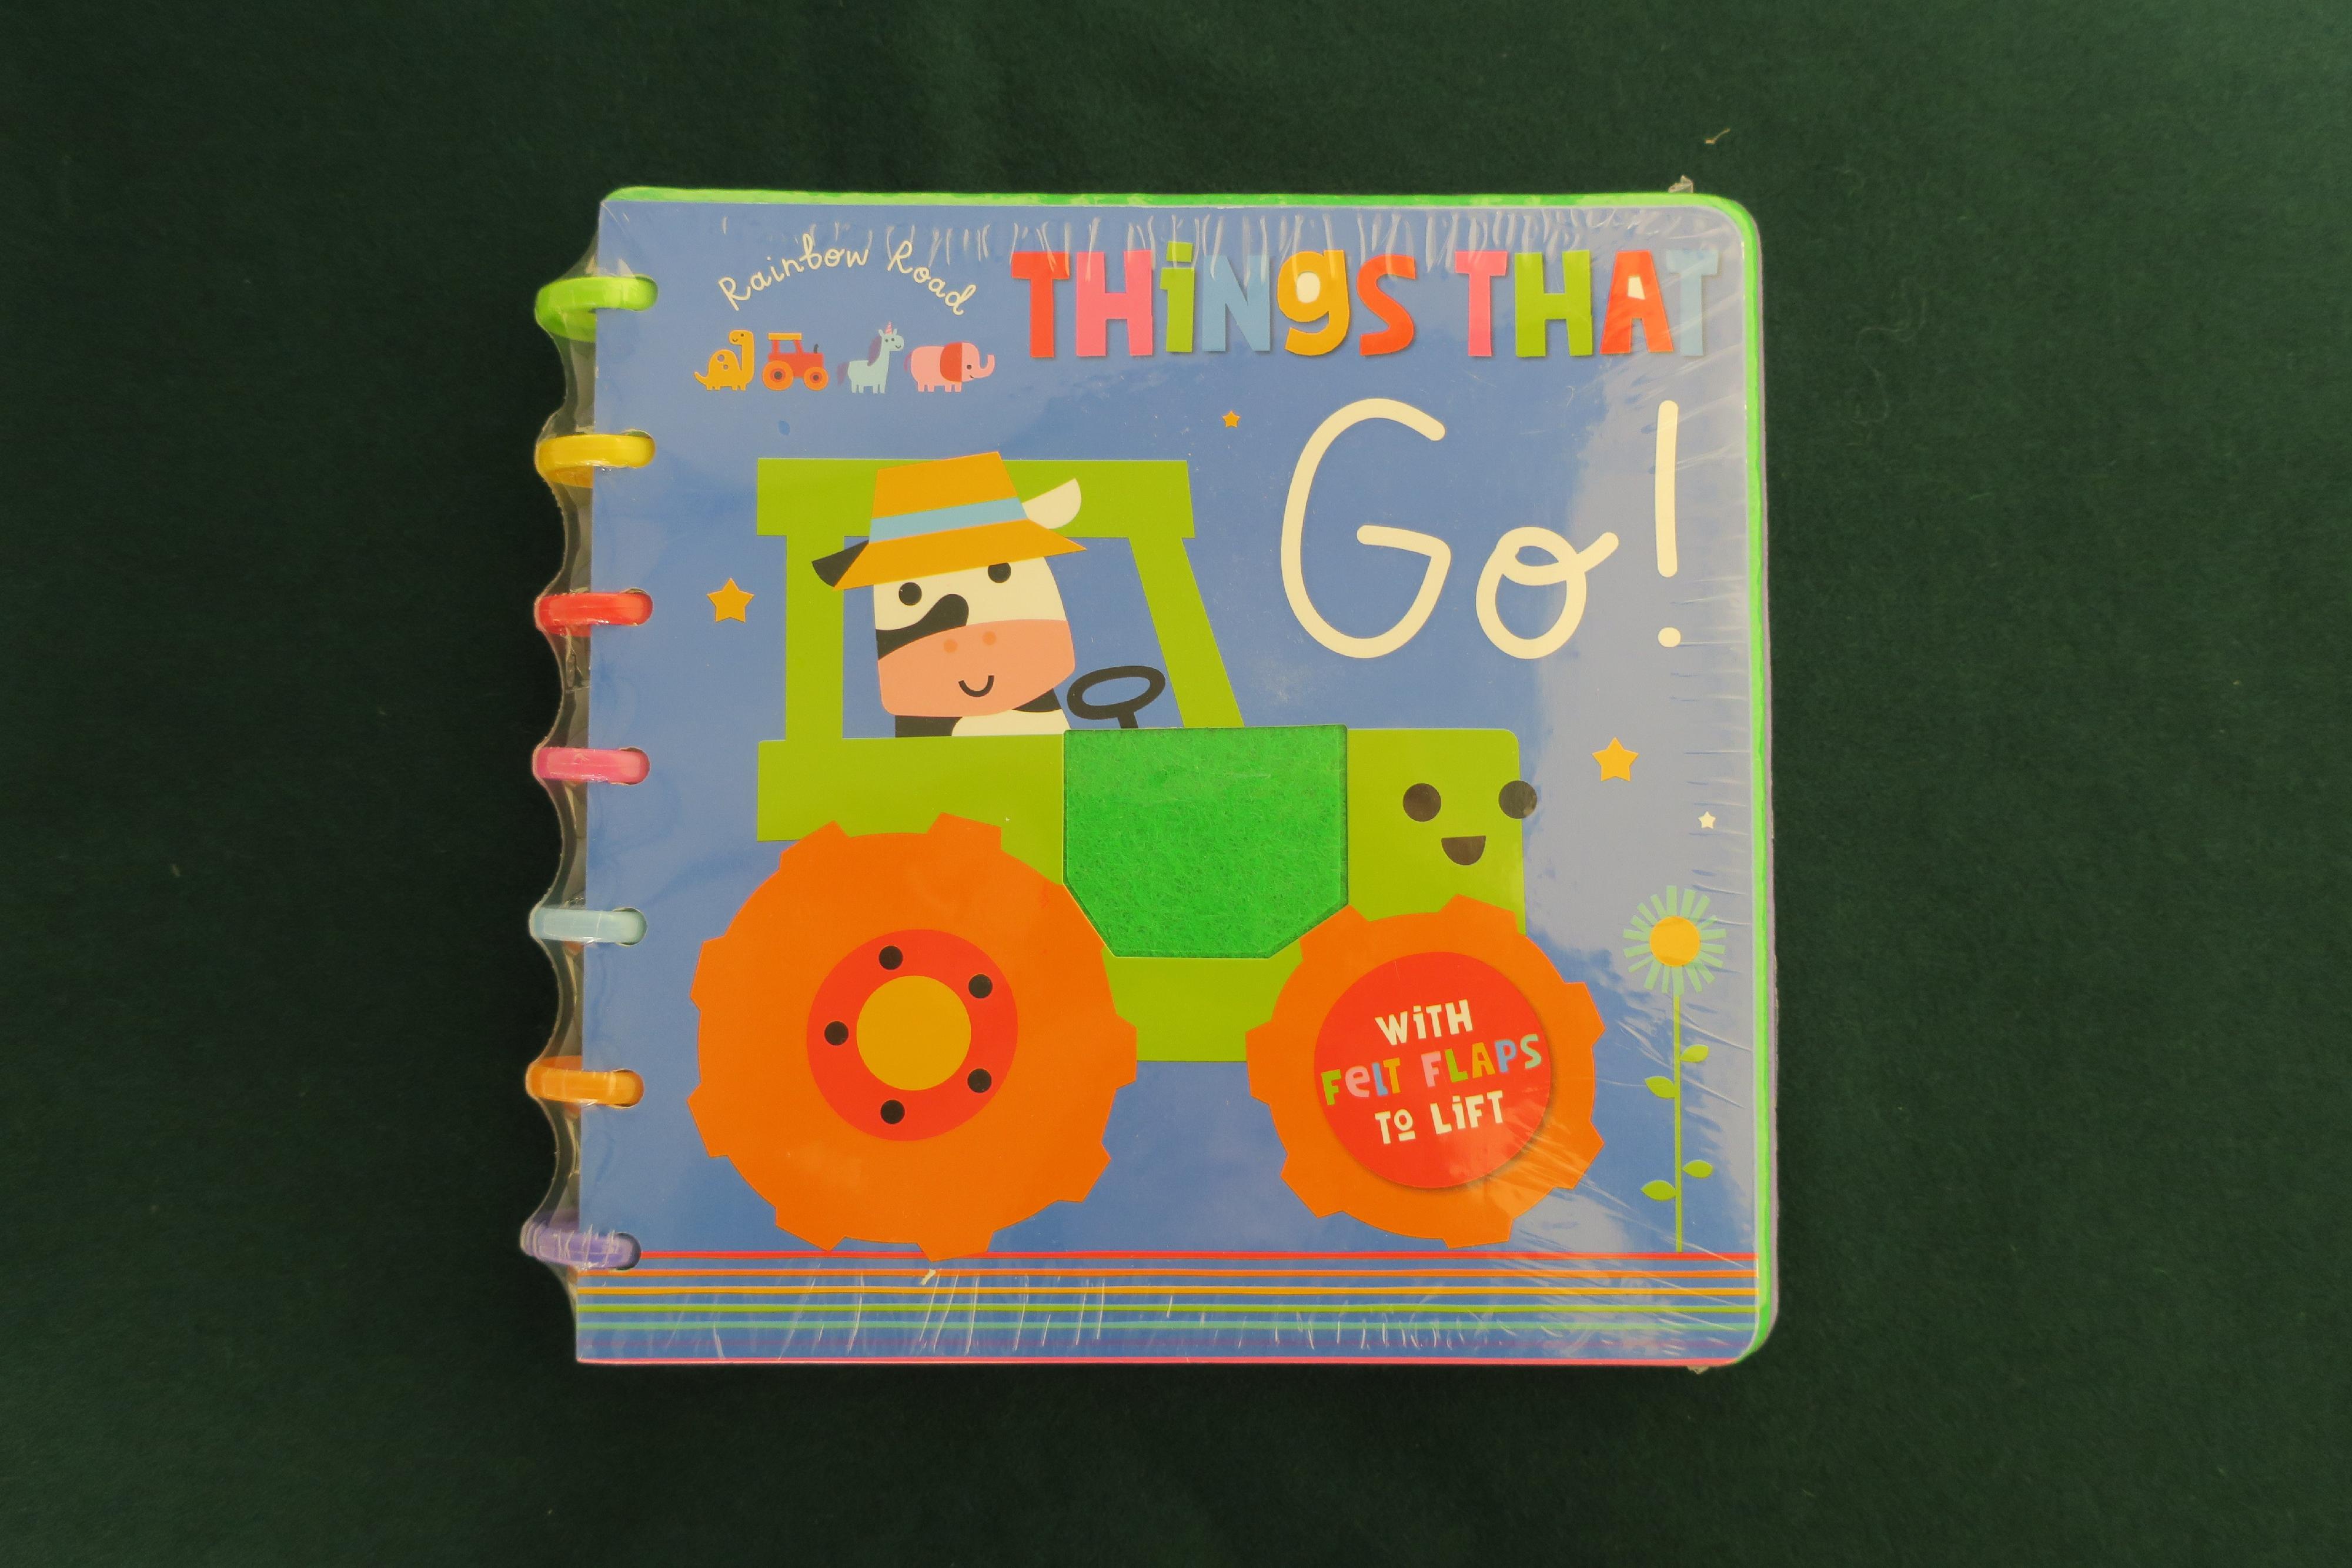 Hong Kong Customs today (March 28) reminded members of the public to stay alert to an unsafe children's board book toy. Test results indicated that the plastic binding rings of the toy may detach and pose suffocation risks to children. Photo shows the children's board book toy concerned.